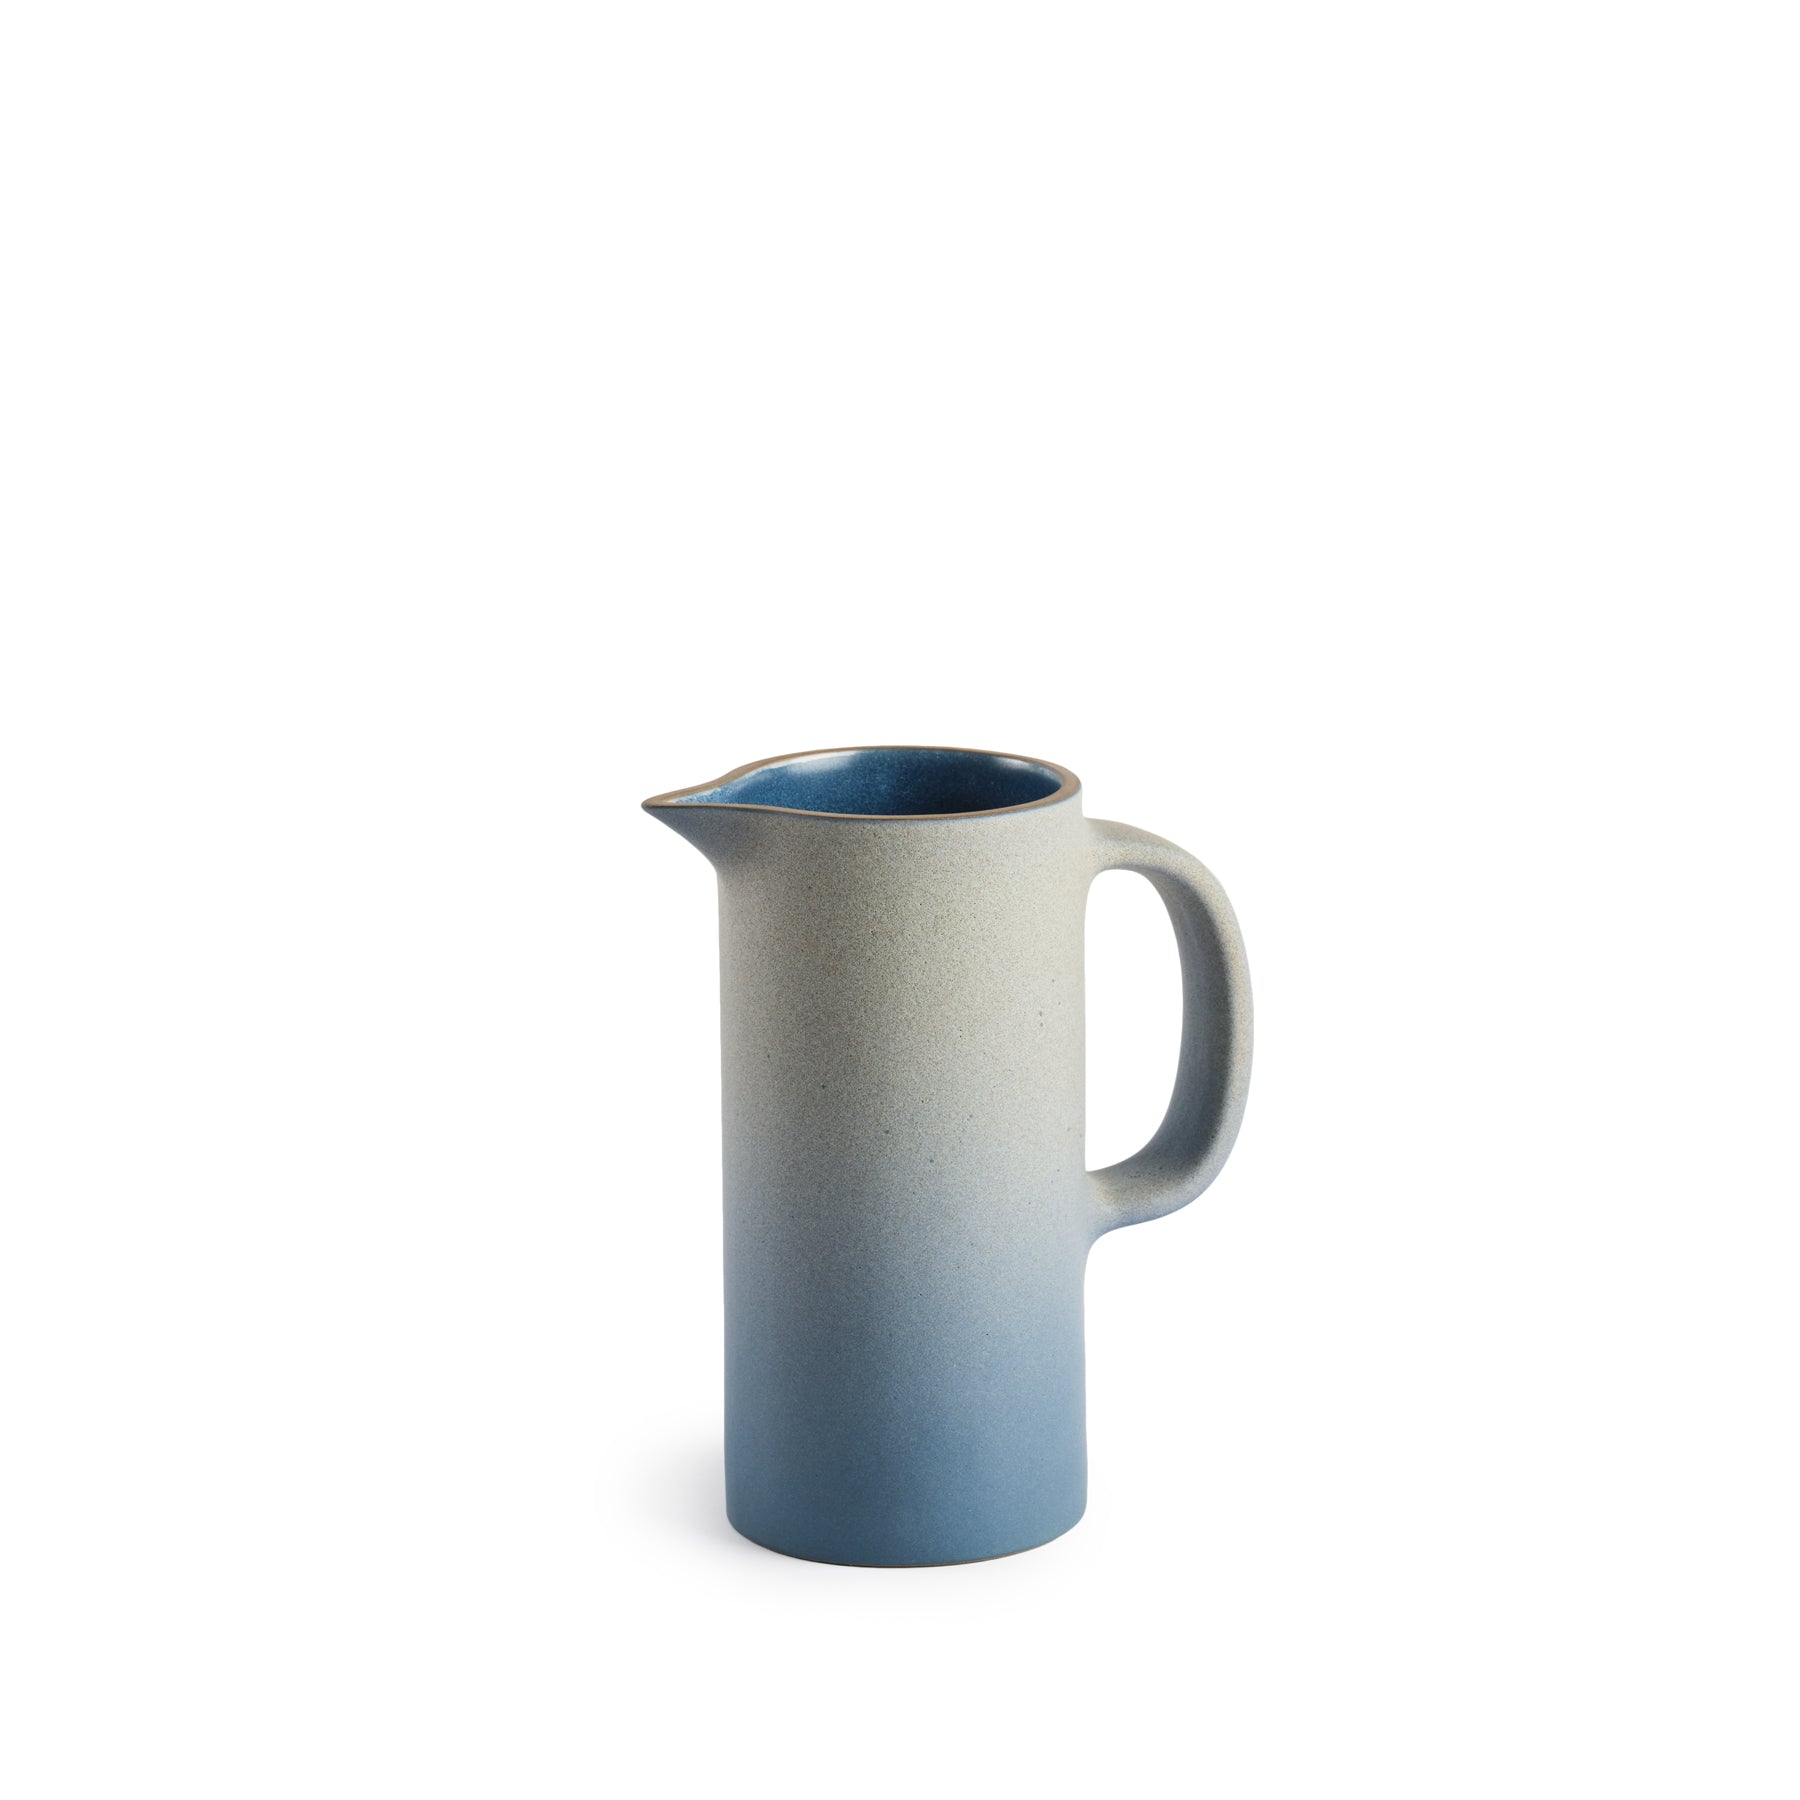 Small Pitcher in Fog and Stillwater